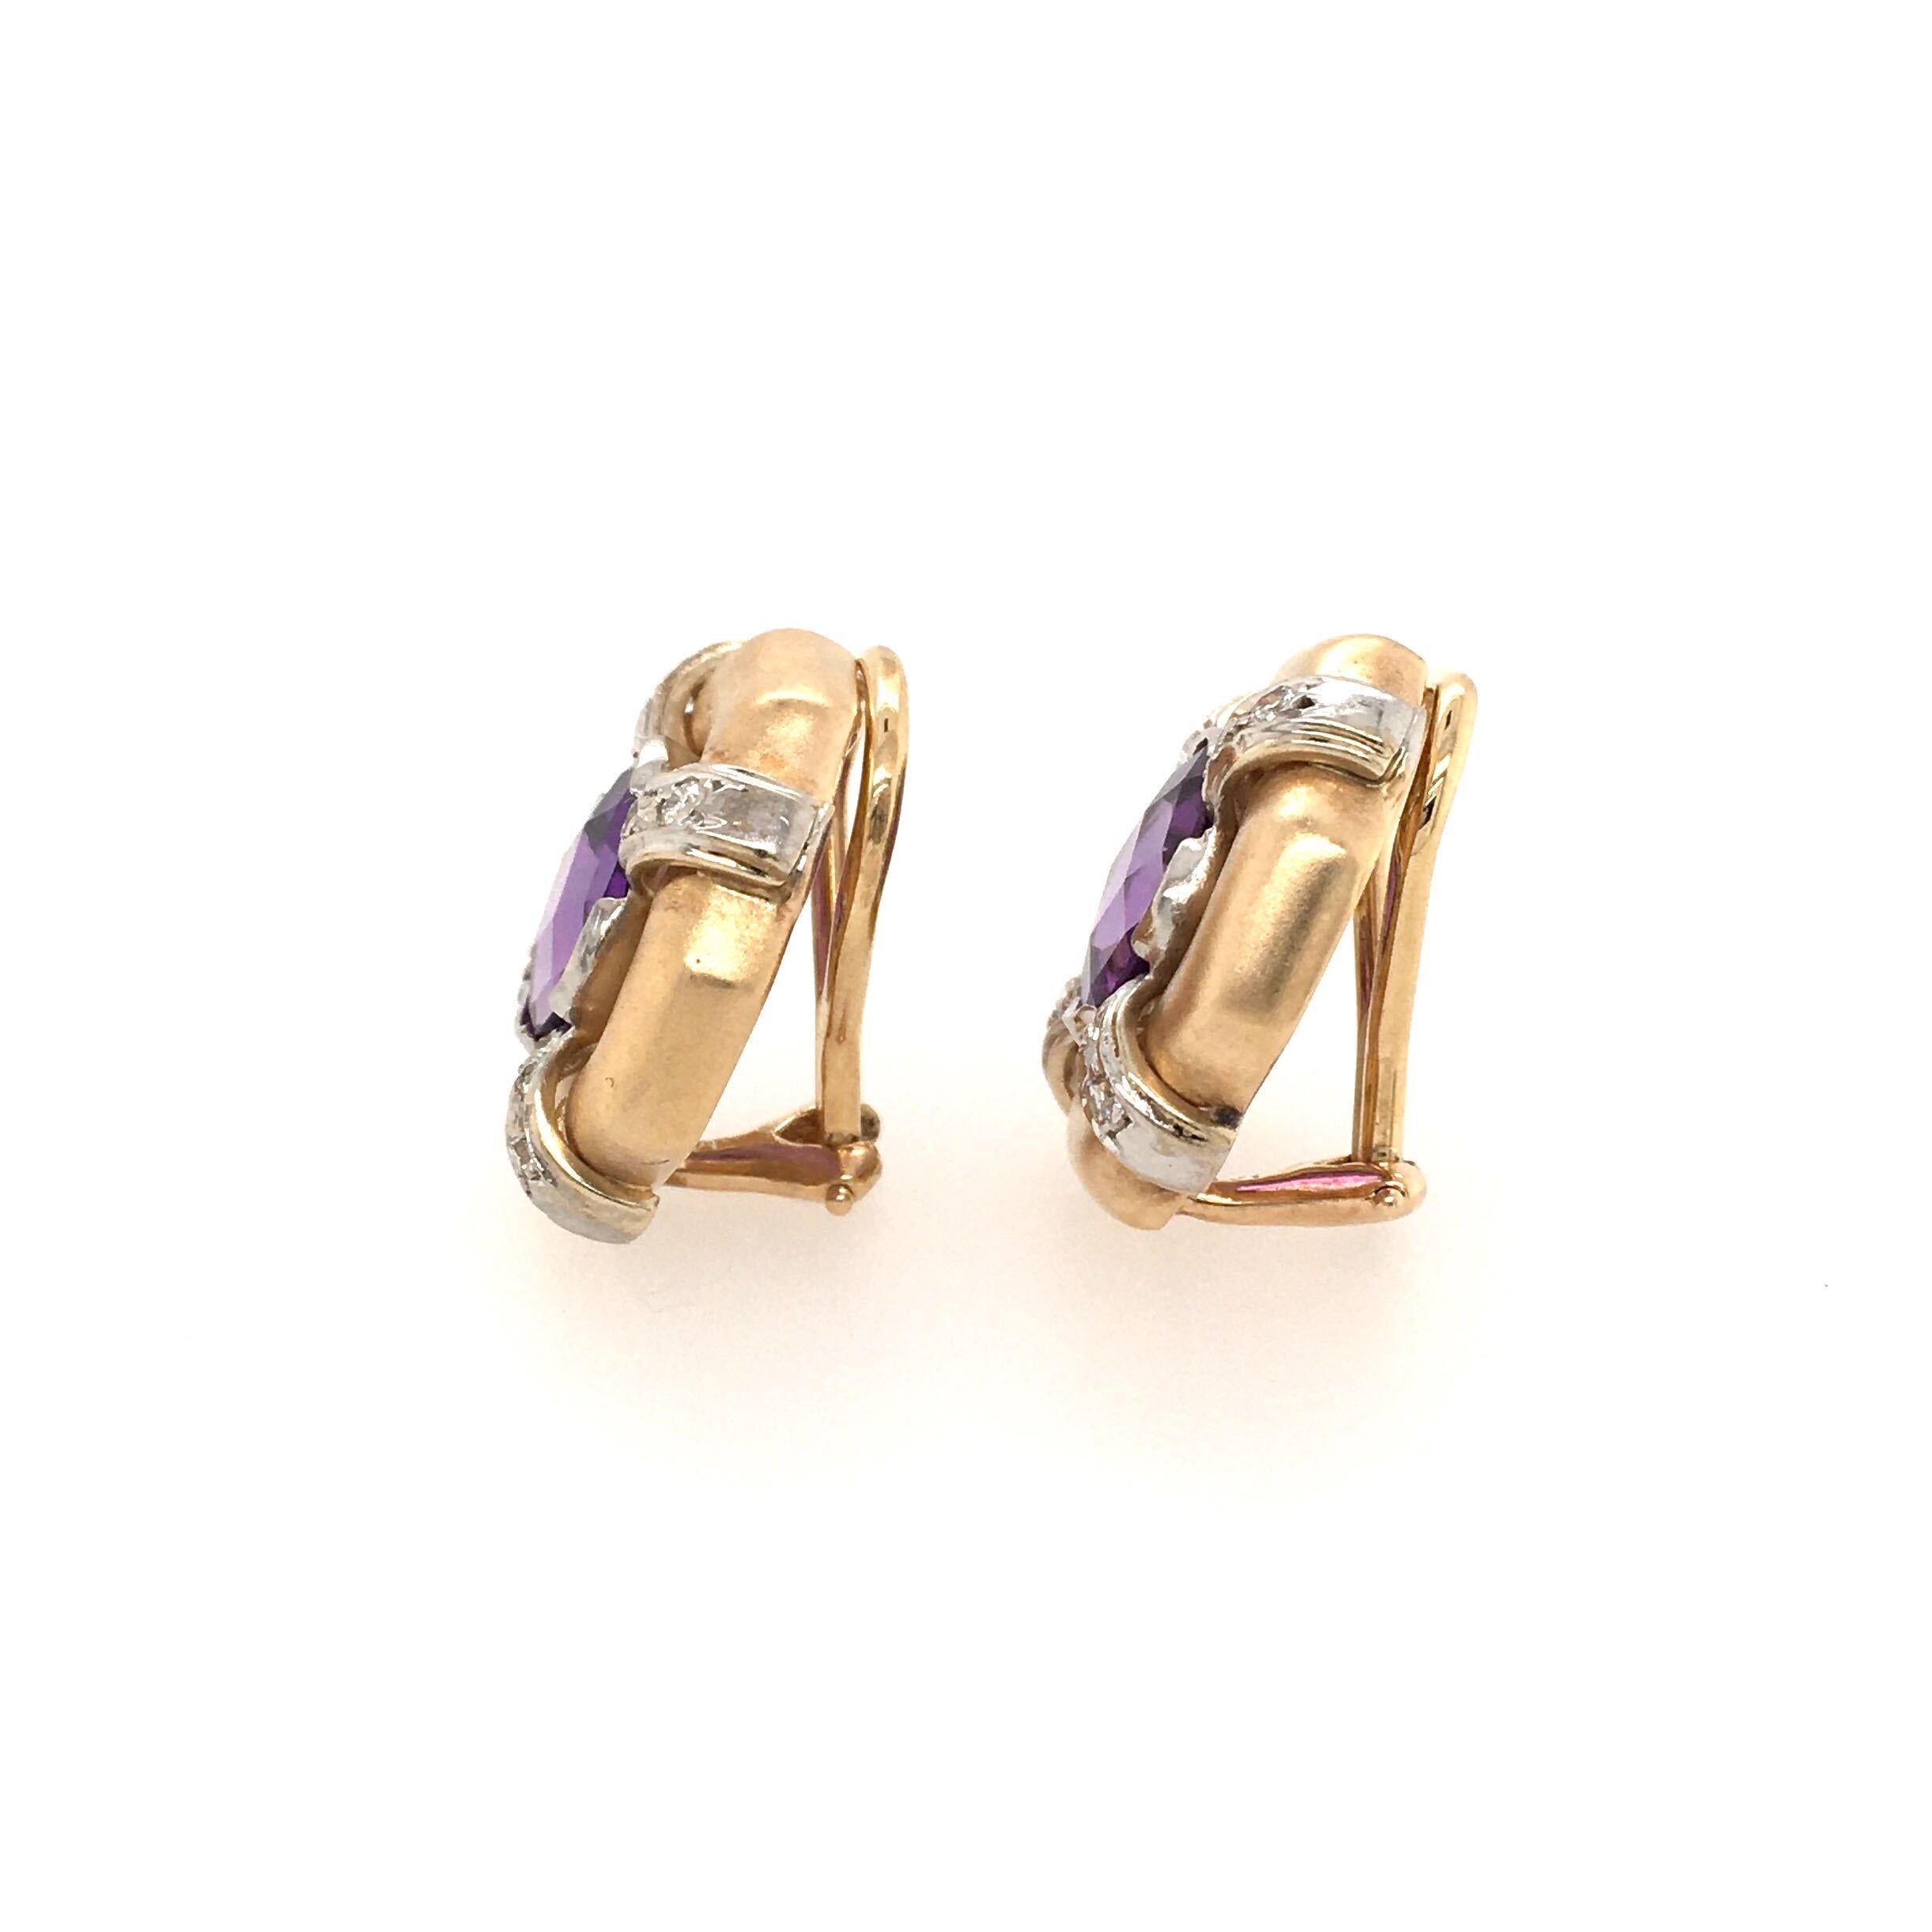 A pair of 14 karat yellow gold, amethyst and diamond earrings. Designed as a matte gold square plaque, centering a square cut amethyst, enhanced by pave set diamond detail. Length is approximately 3/4 inches, gross weight is approximately 11.6